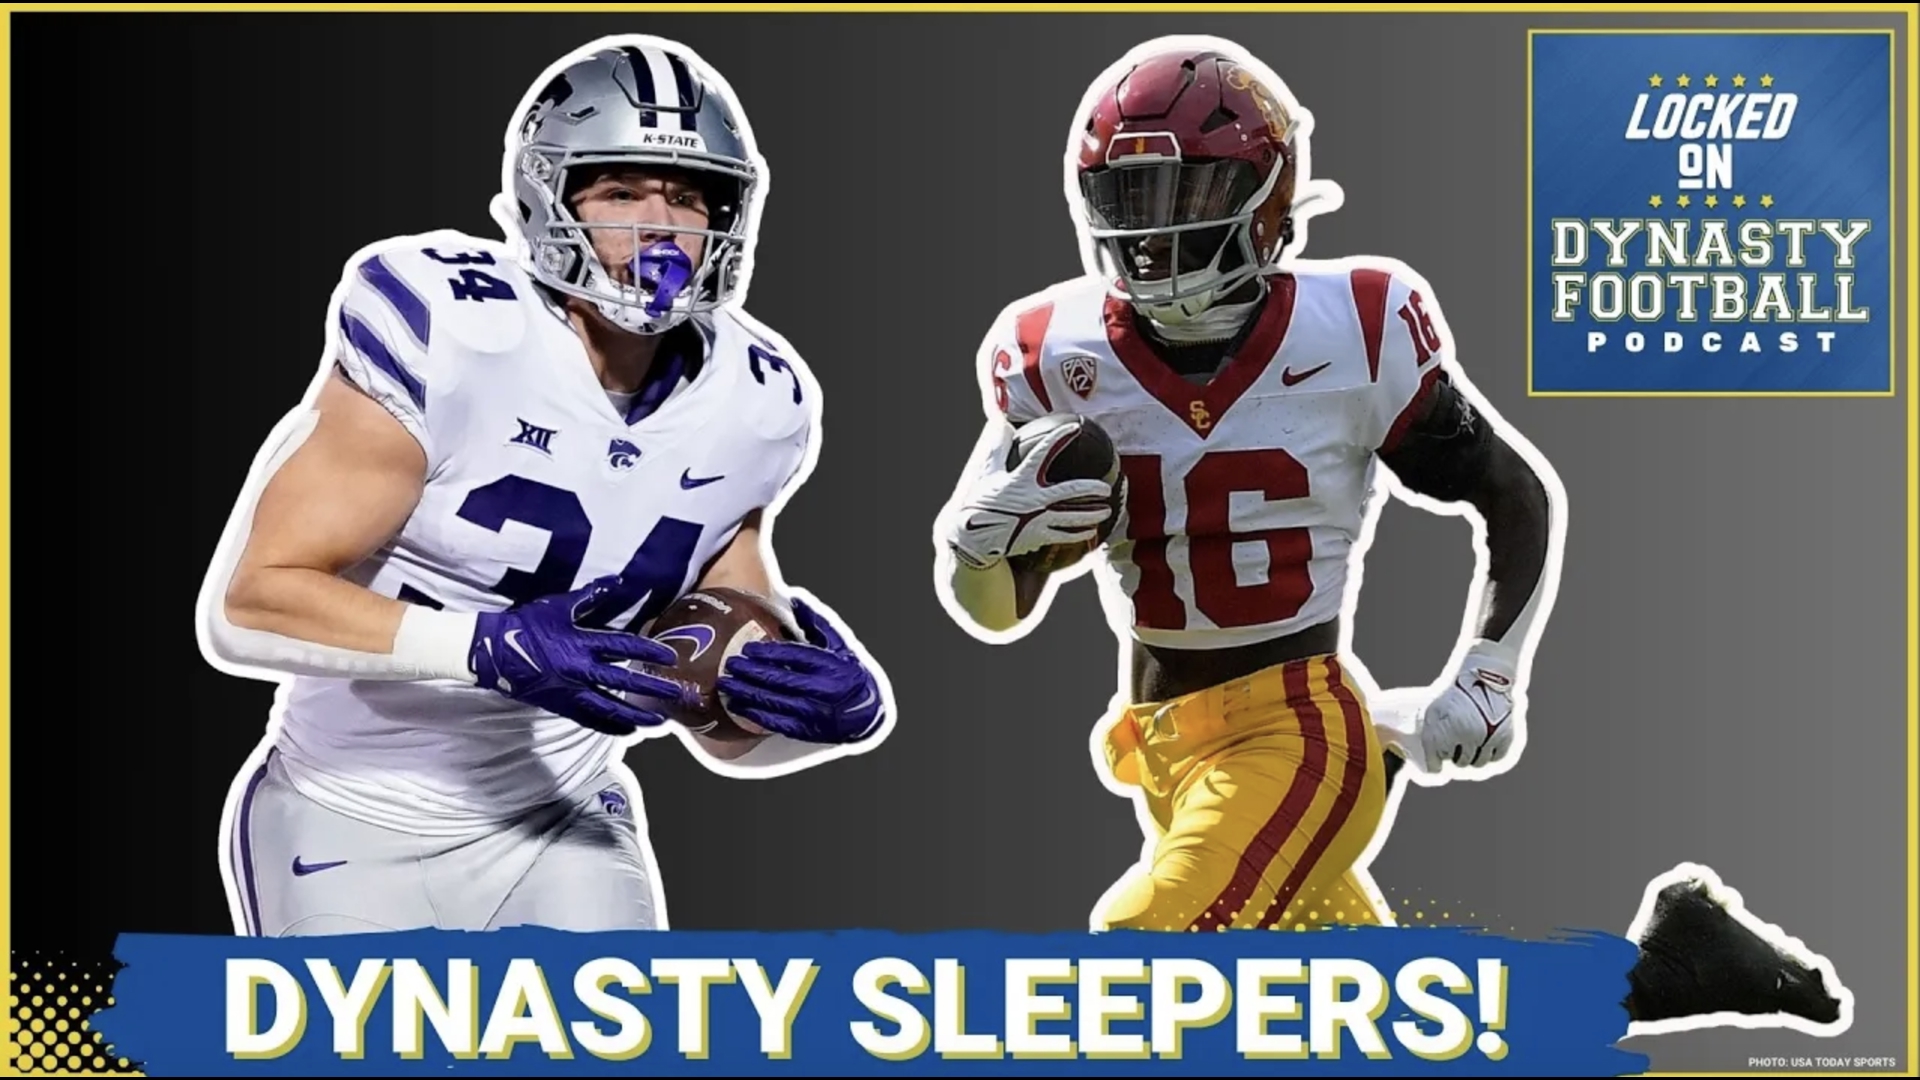 The 2024 NFL Draft kicks off tonight and there are plenty of dynasty sleepers to keep an eye on over the weekend.